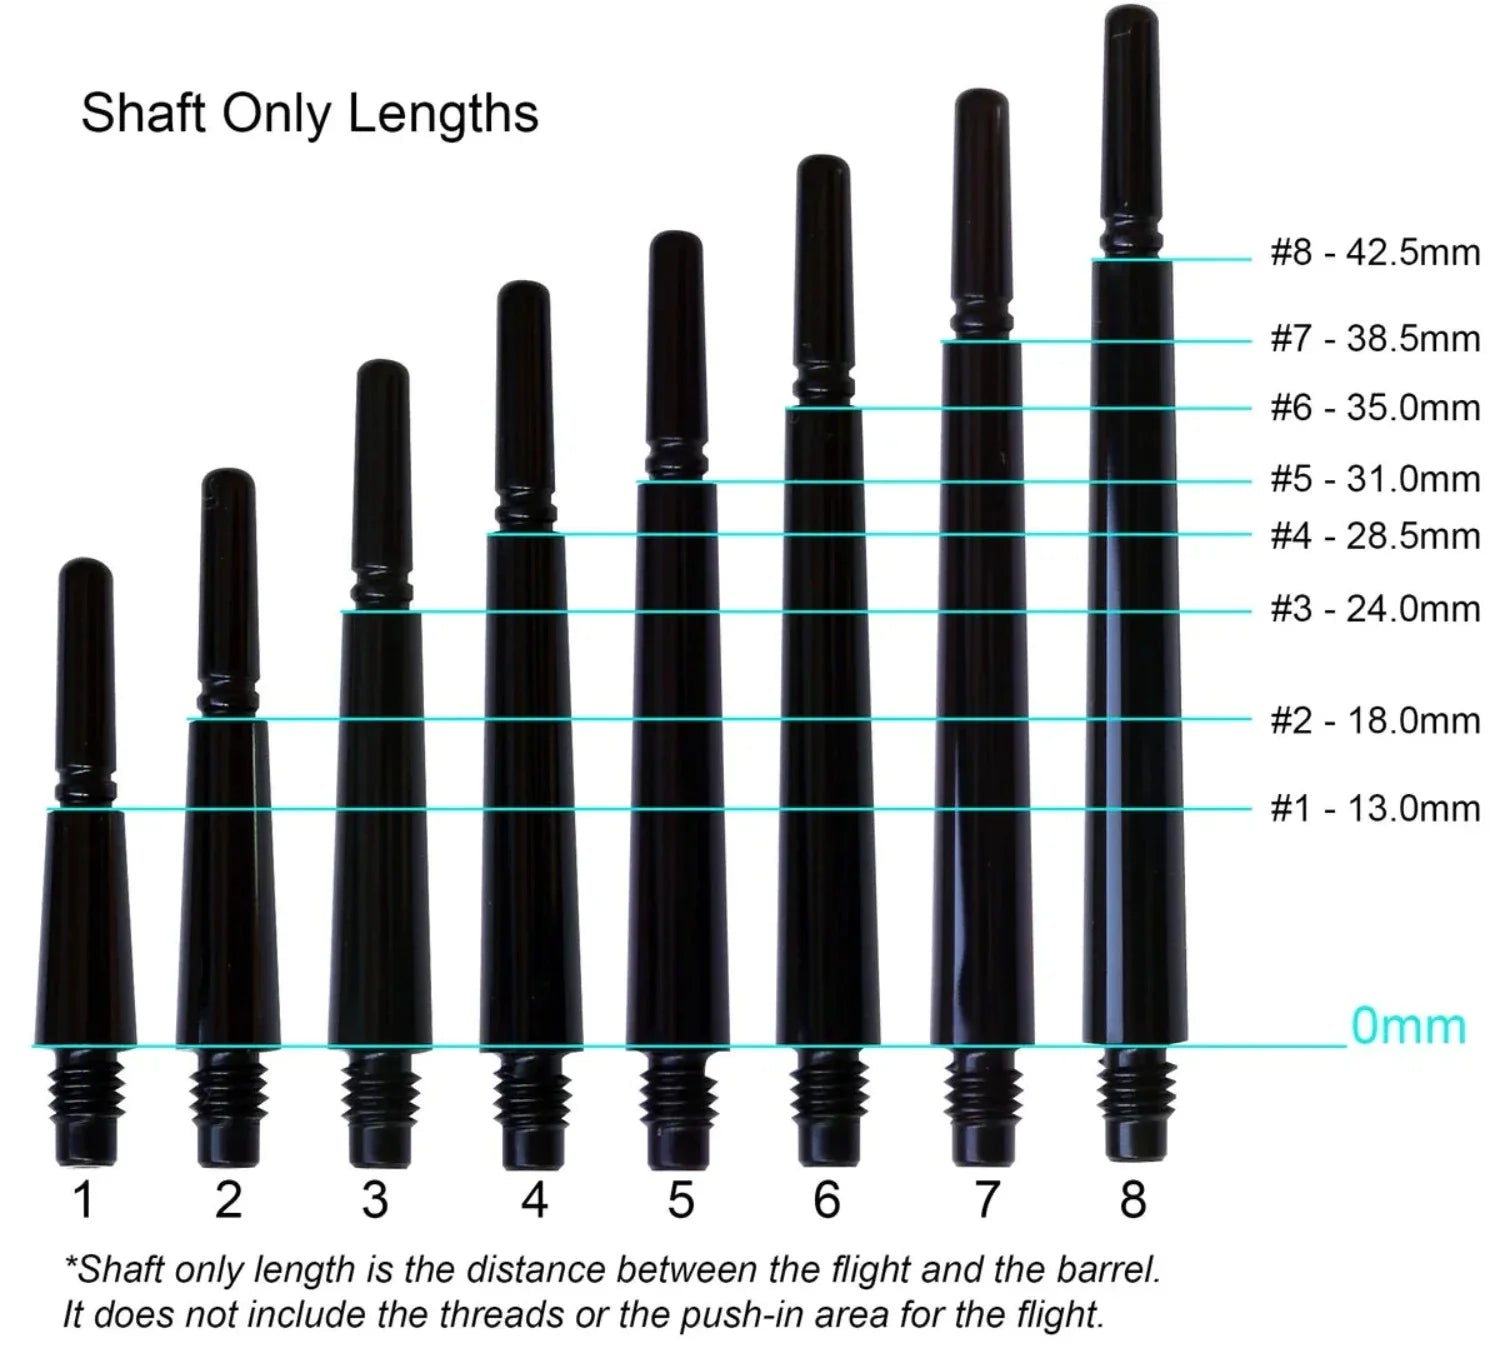 Length comparison chart of Fit Flight dart shafts showing the various sizes with Long #7 highlighted.